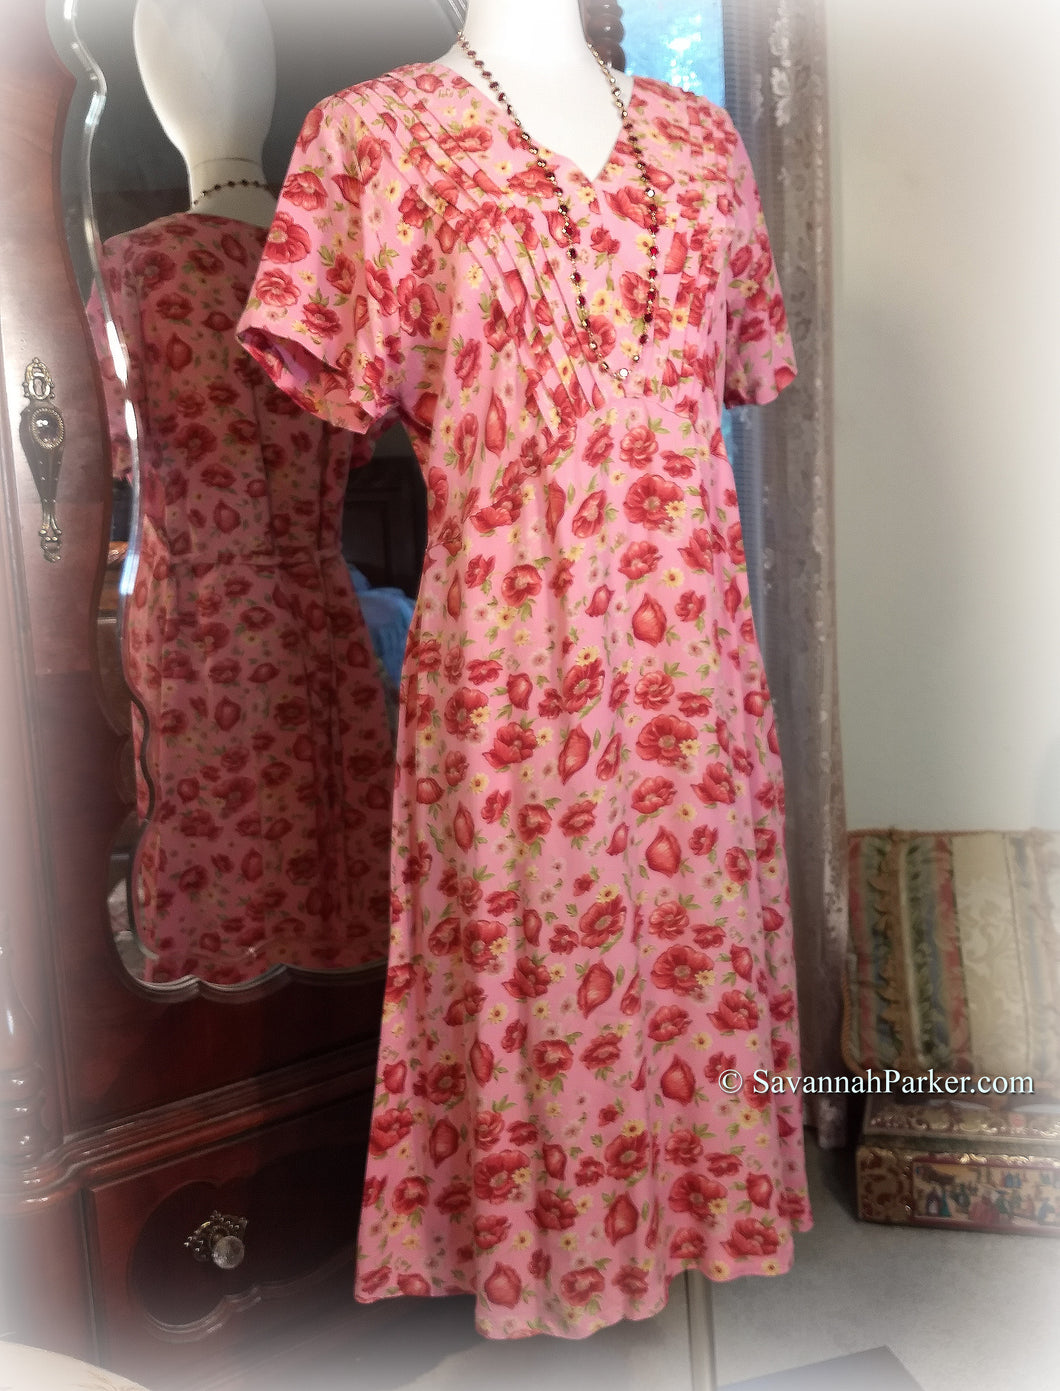 SOLD April Cornell Vintage - Red and Pink Floral Rayon Crepe -1990s Does 1930s/40s Spring and Summer Dress - Cottagecore - Back Ties - Size L